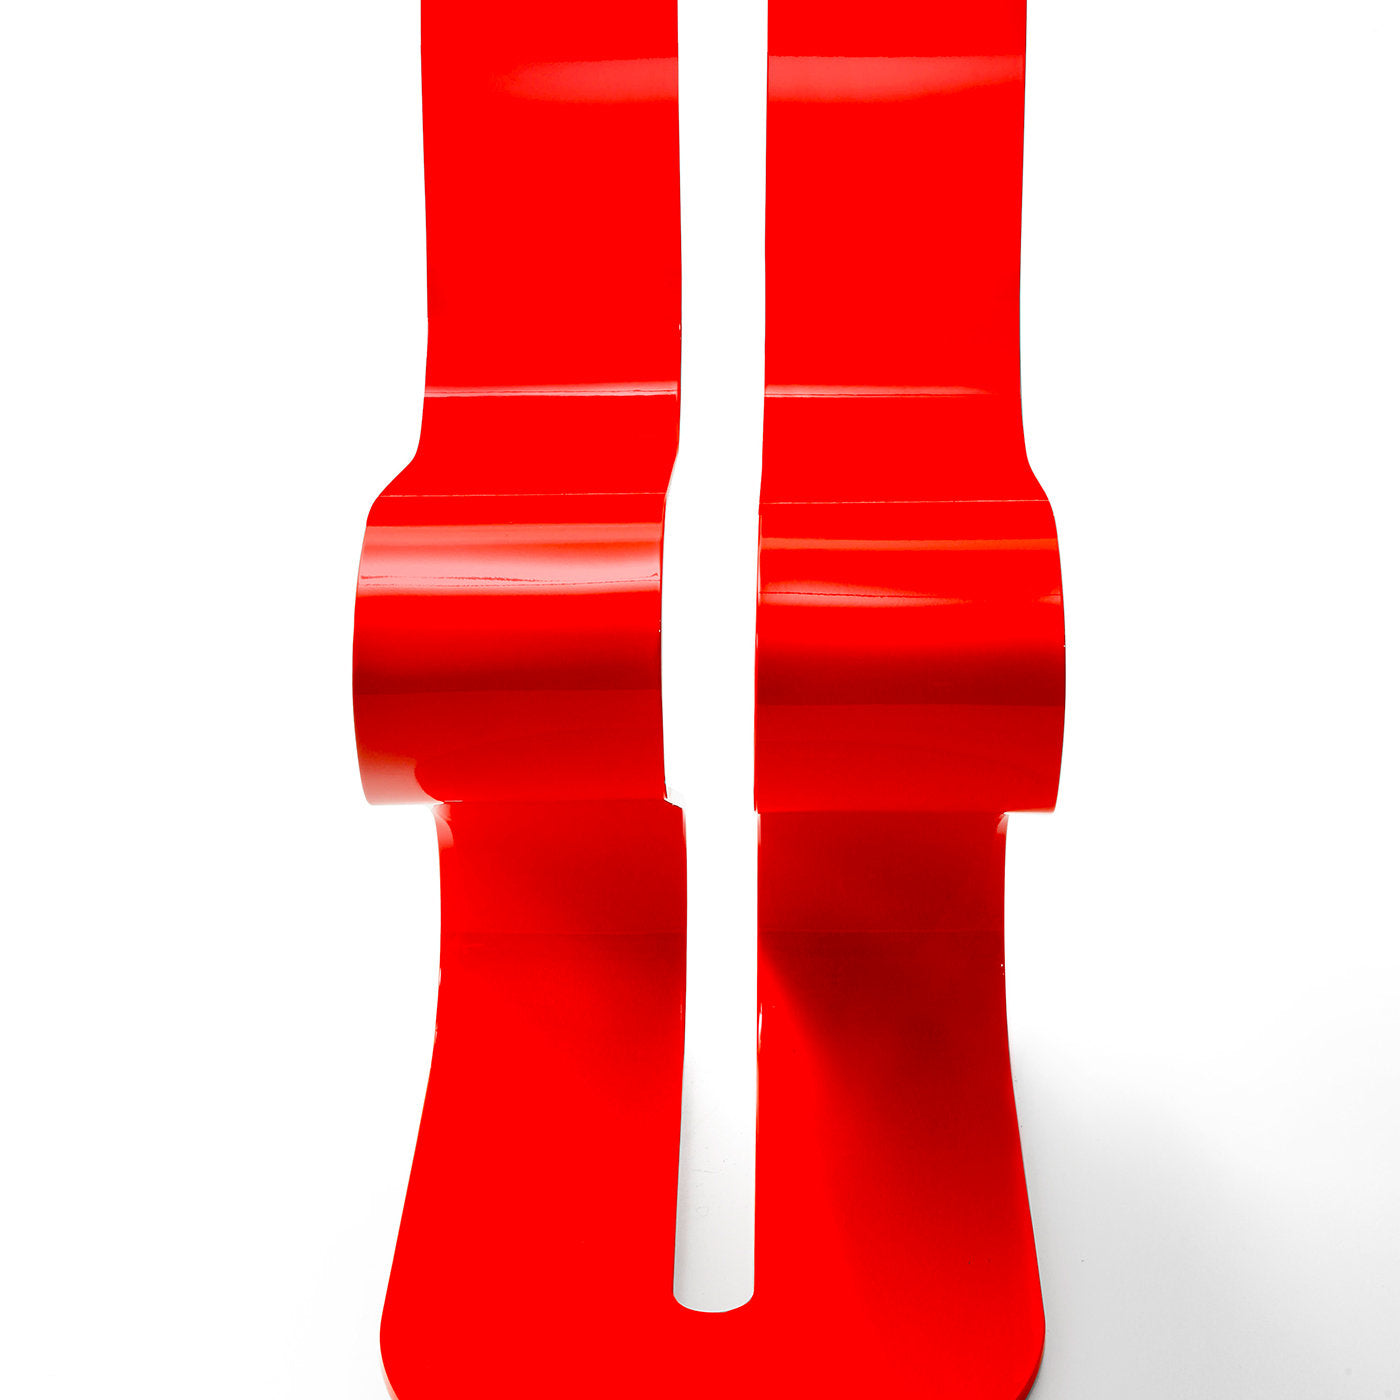 Fluid Ribbon Red Chair by Michael D'Amato - Alternative view 2